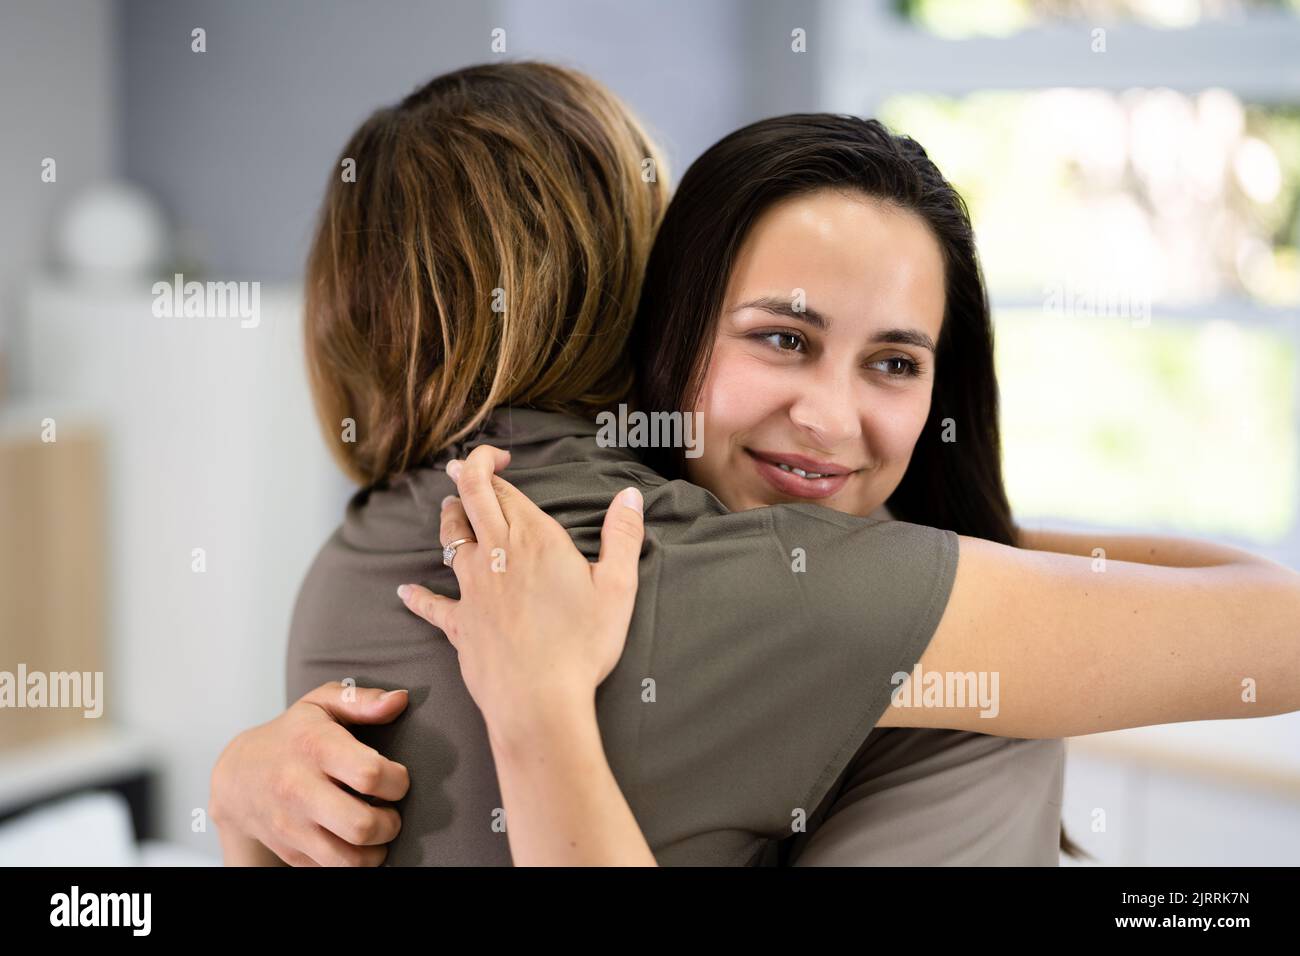 Disagreement And Mistrust. Sneaky Fake Female Pretends To Be A Friend Stock Photo